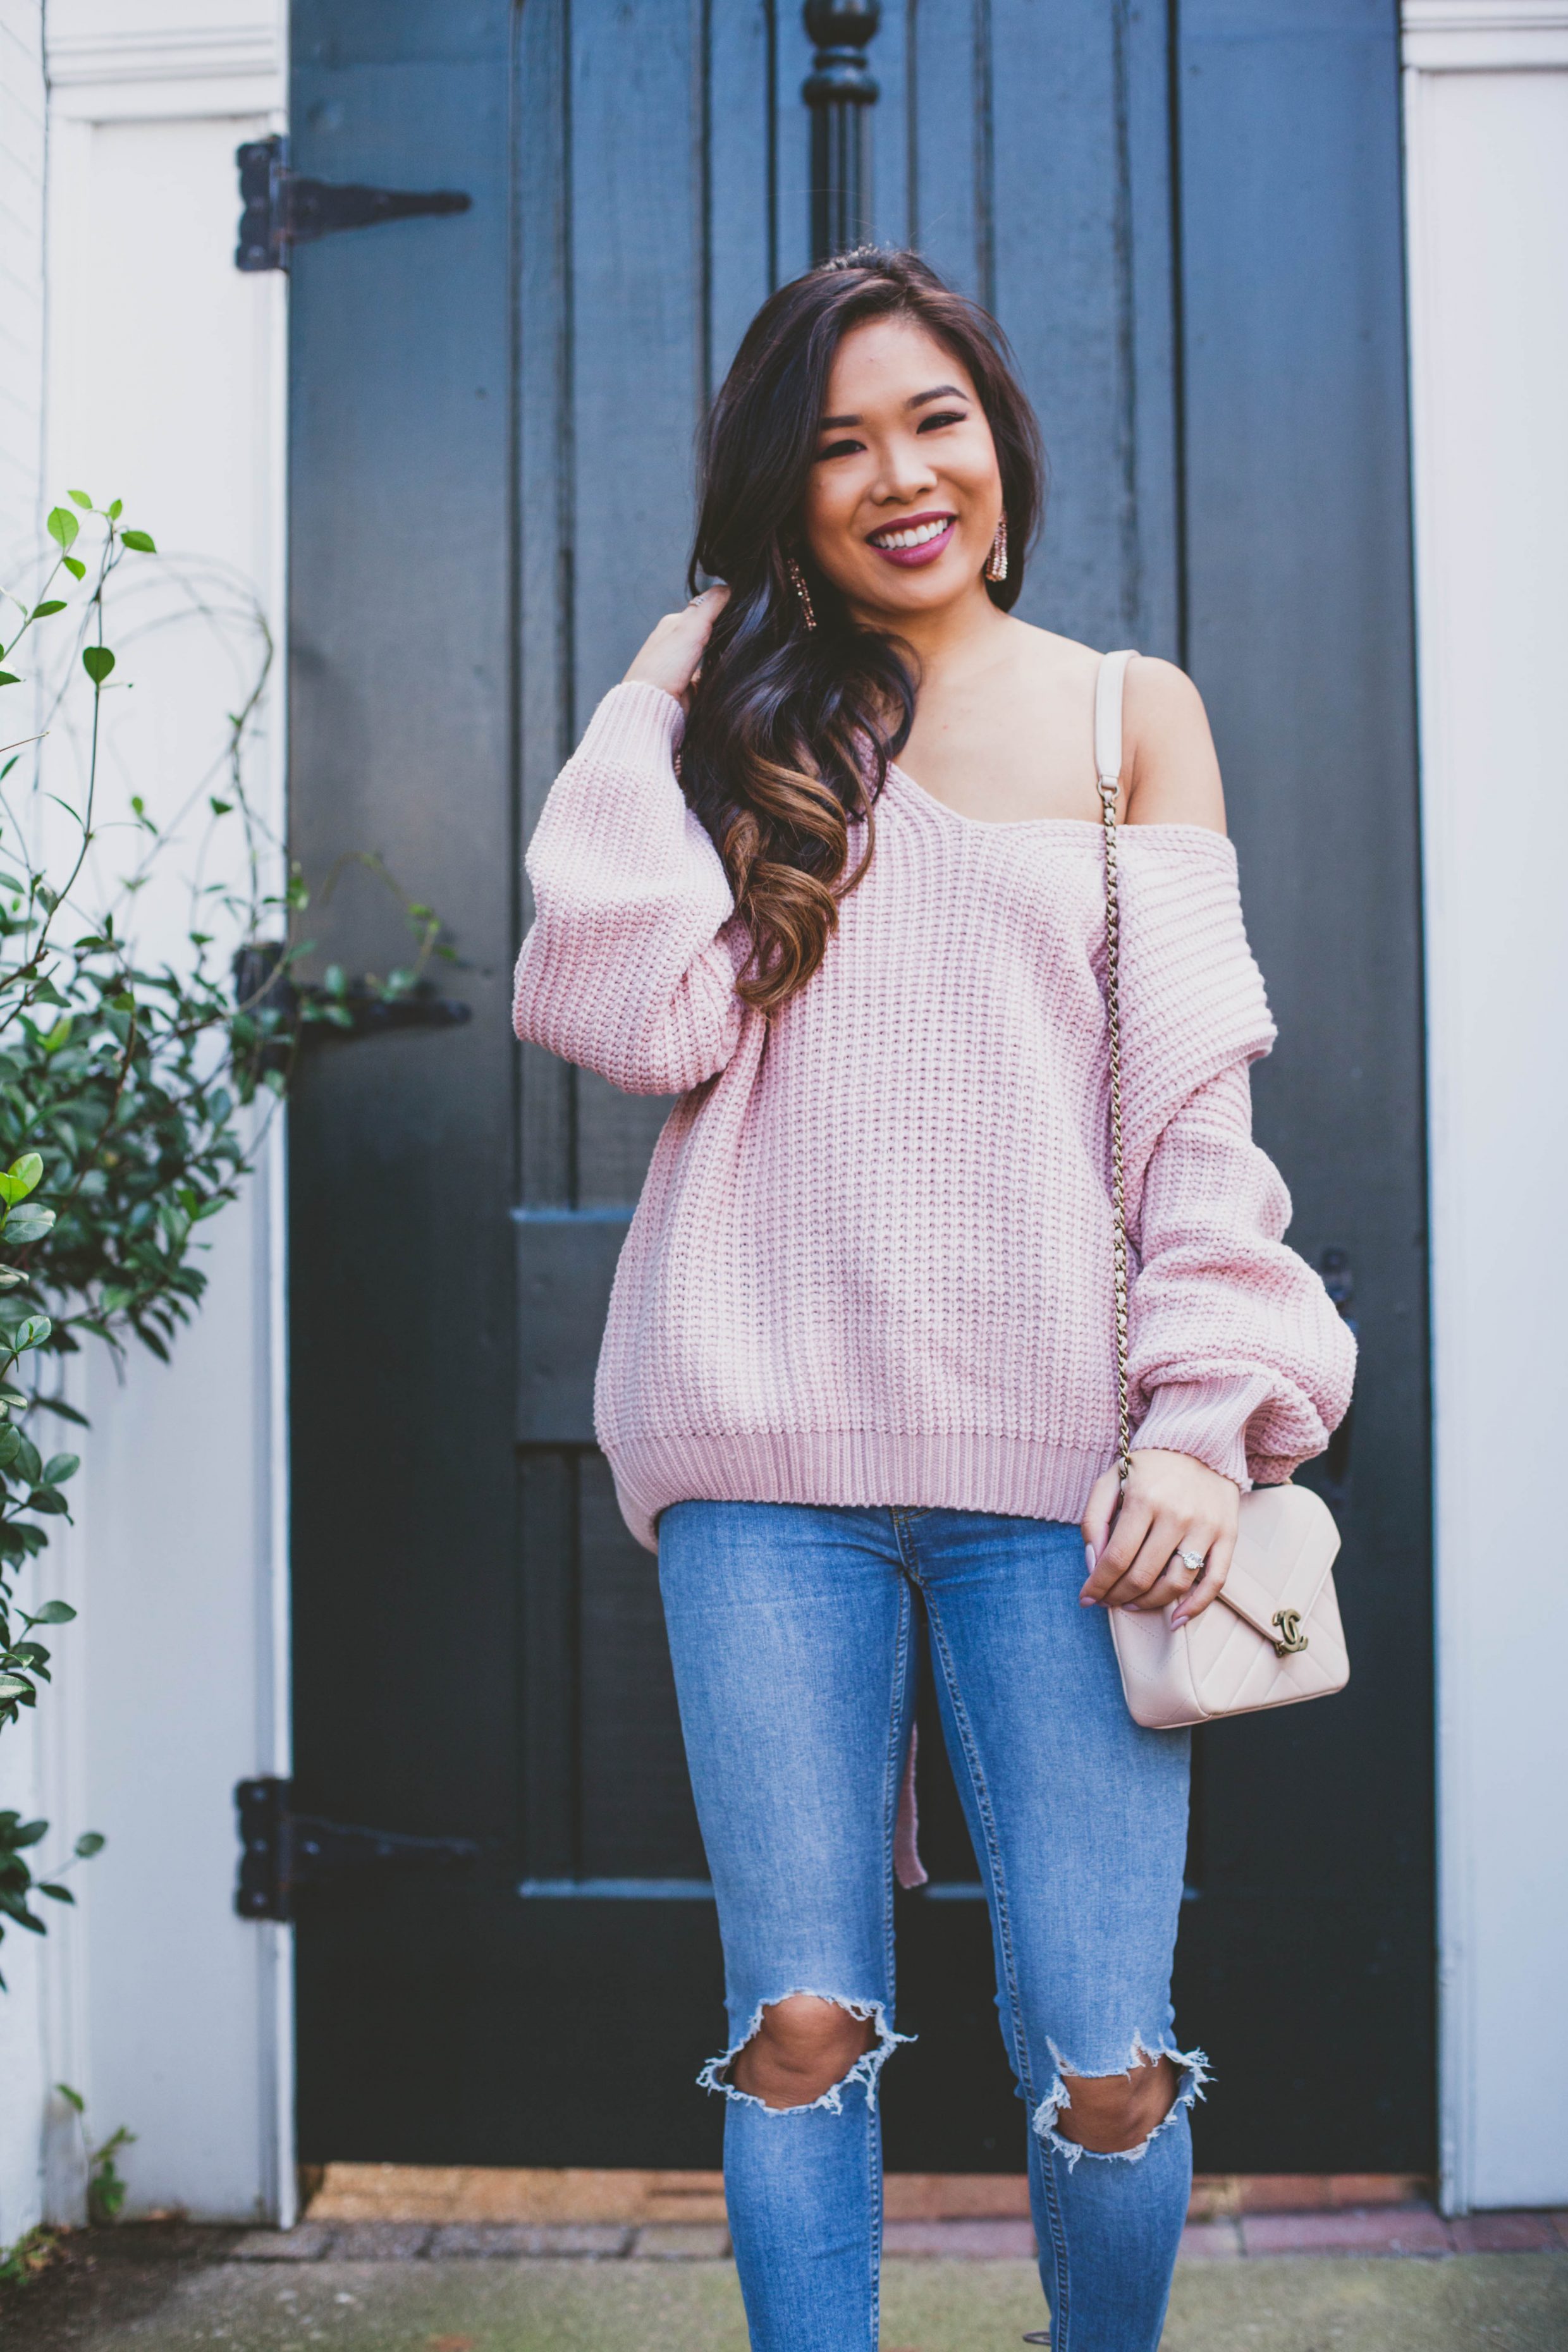 Blush lace up sweater and pink Chanel bag